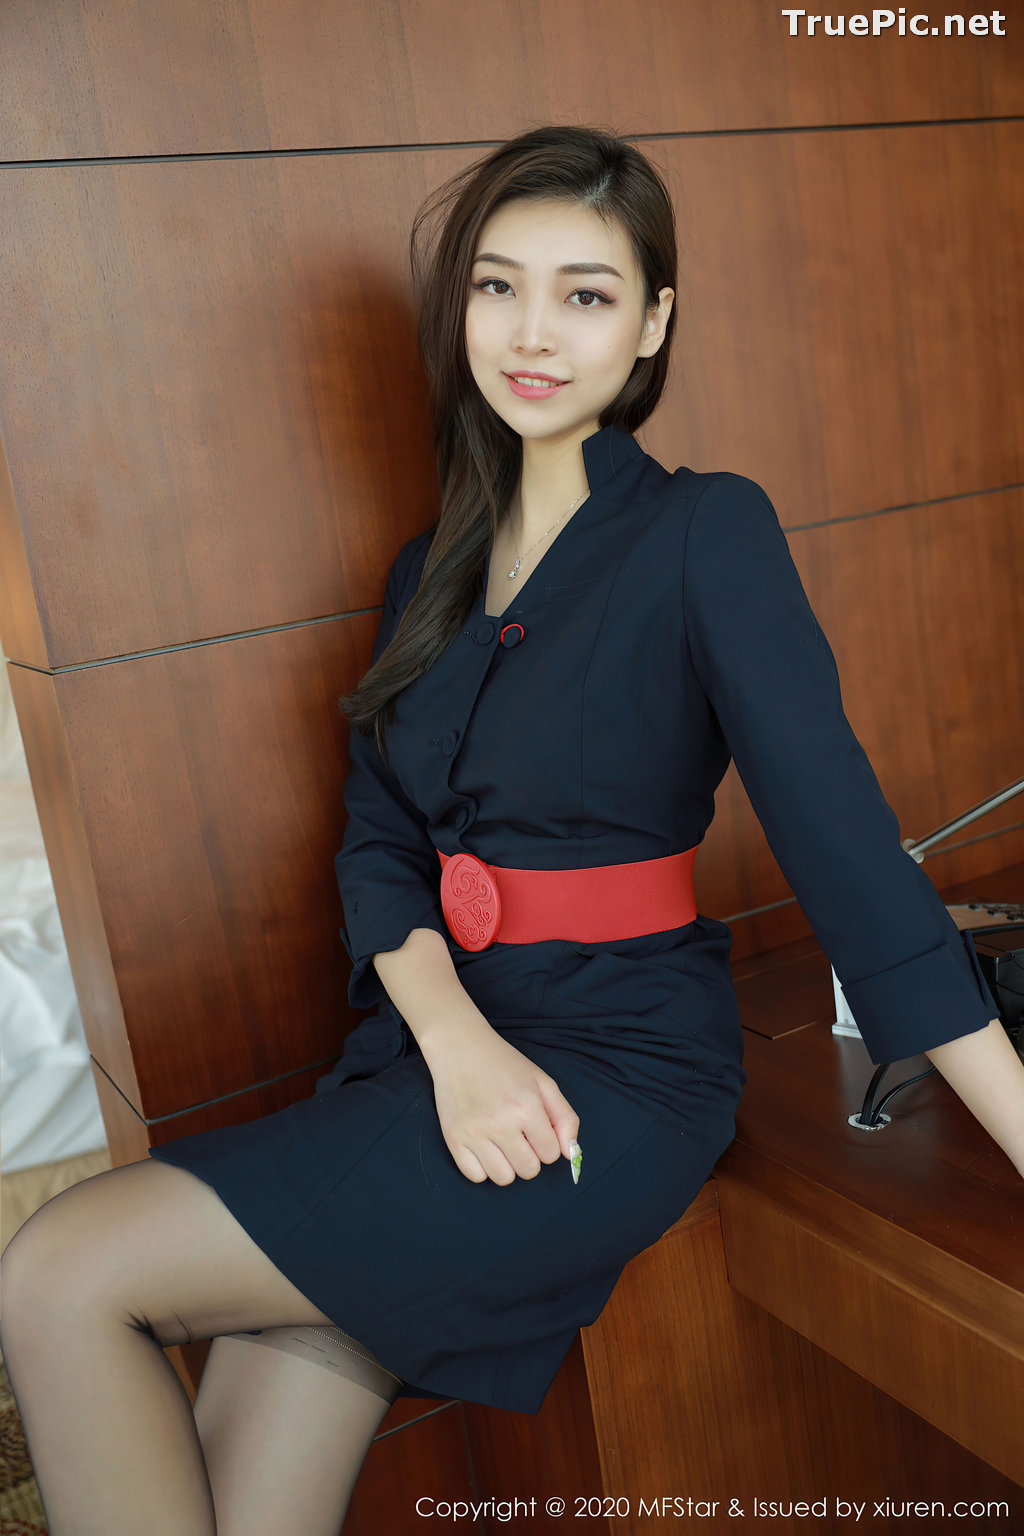 Image MFStar Vol.404 – Chinese Model – Zheng Ying Shan (郑颖姗) – Sexy Office Girl - TruePic.net - Picture-16